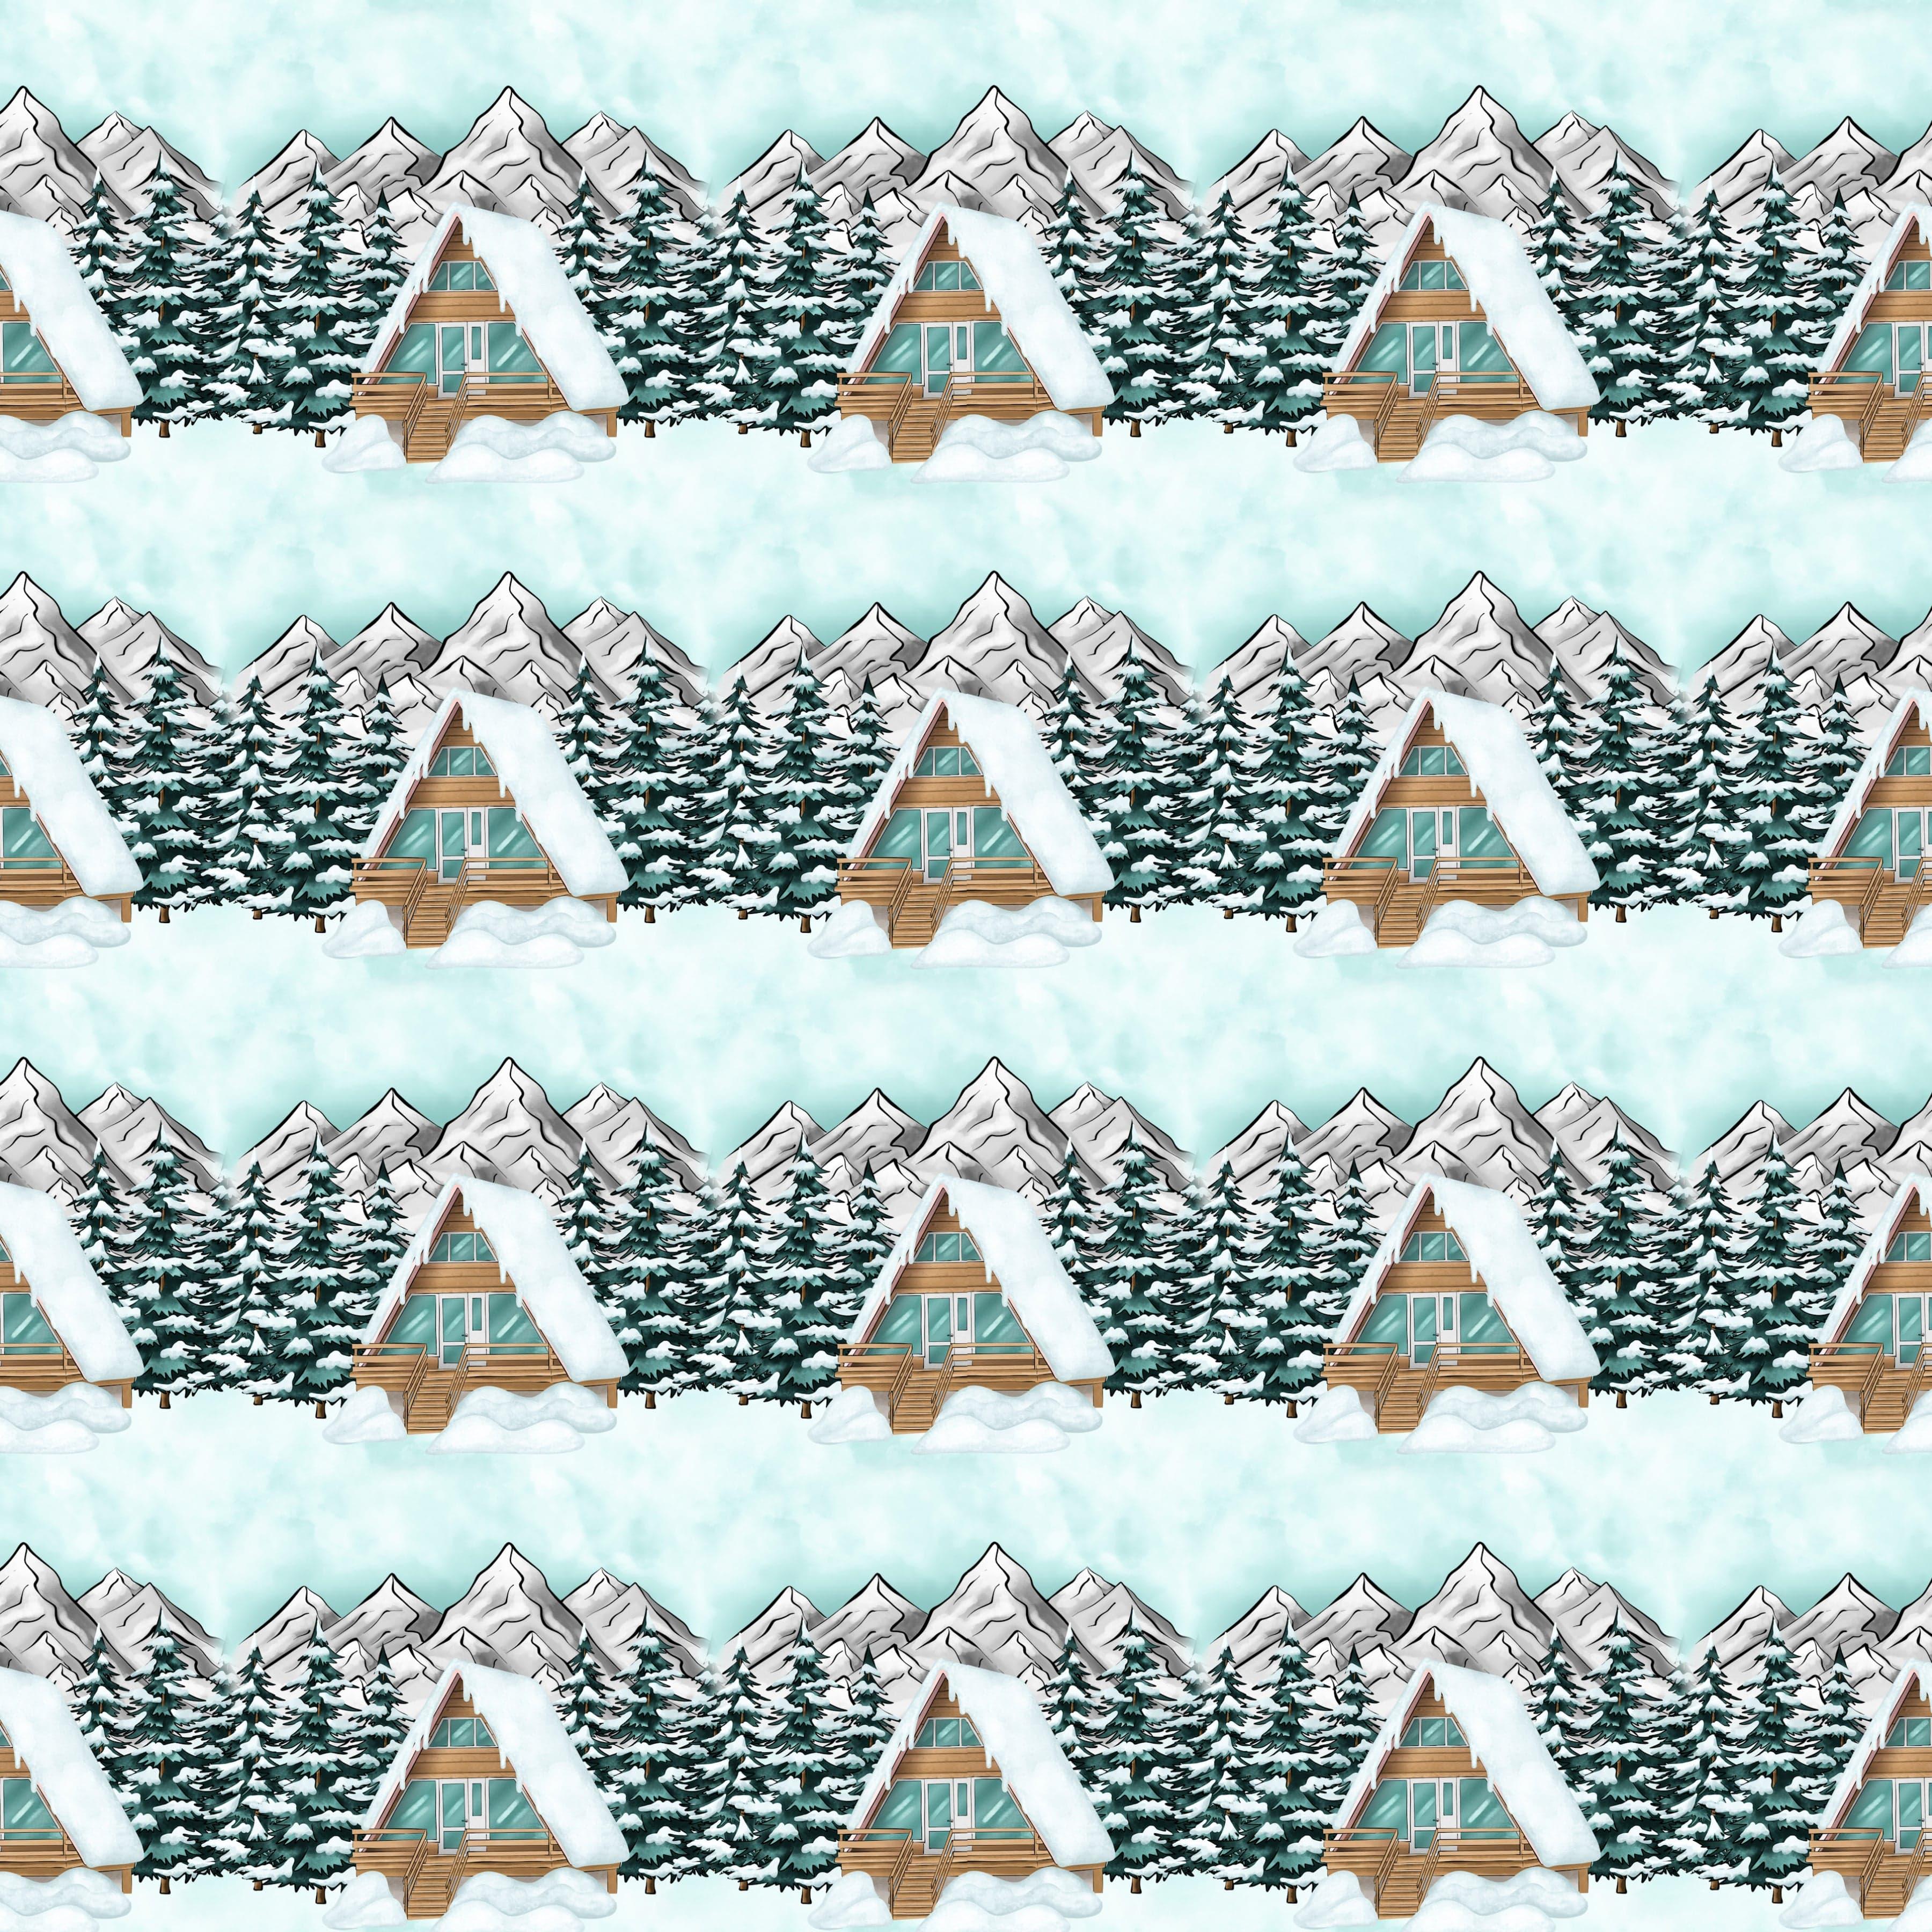  Snow Business Collection Chalet 12 x 12 Double-Sided Scrapbook Paper by SSC Designs - Scrapbook Supply Companies